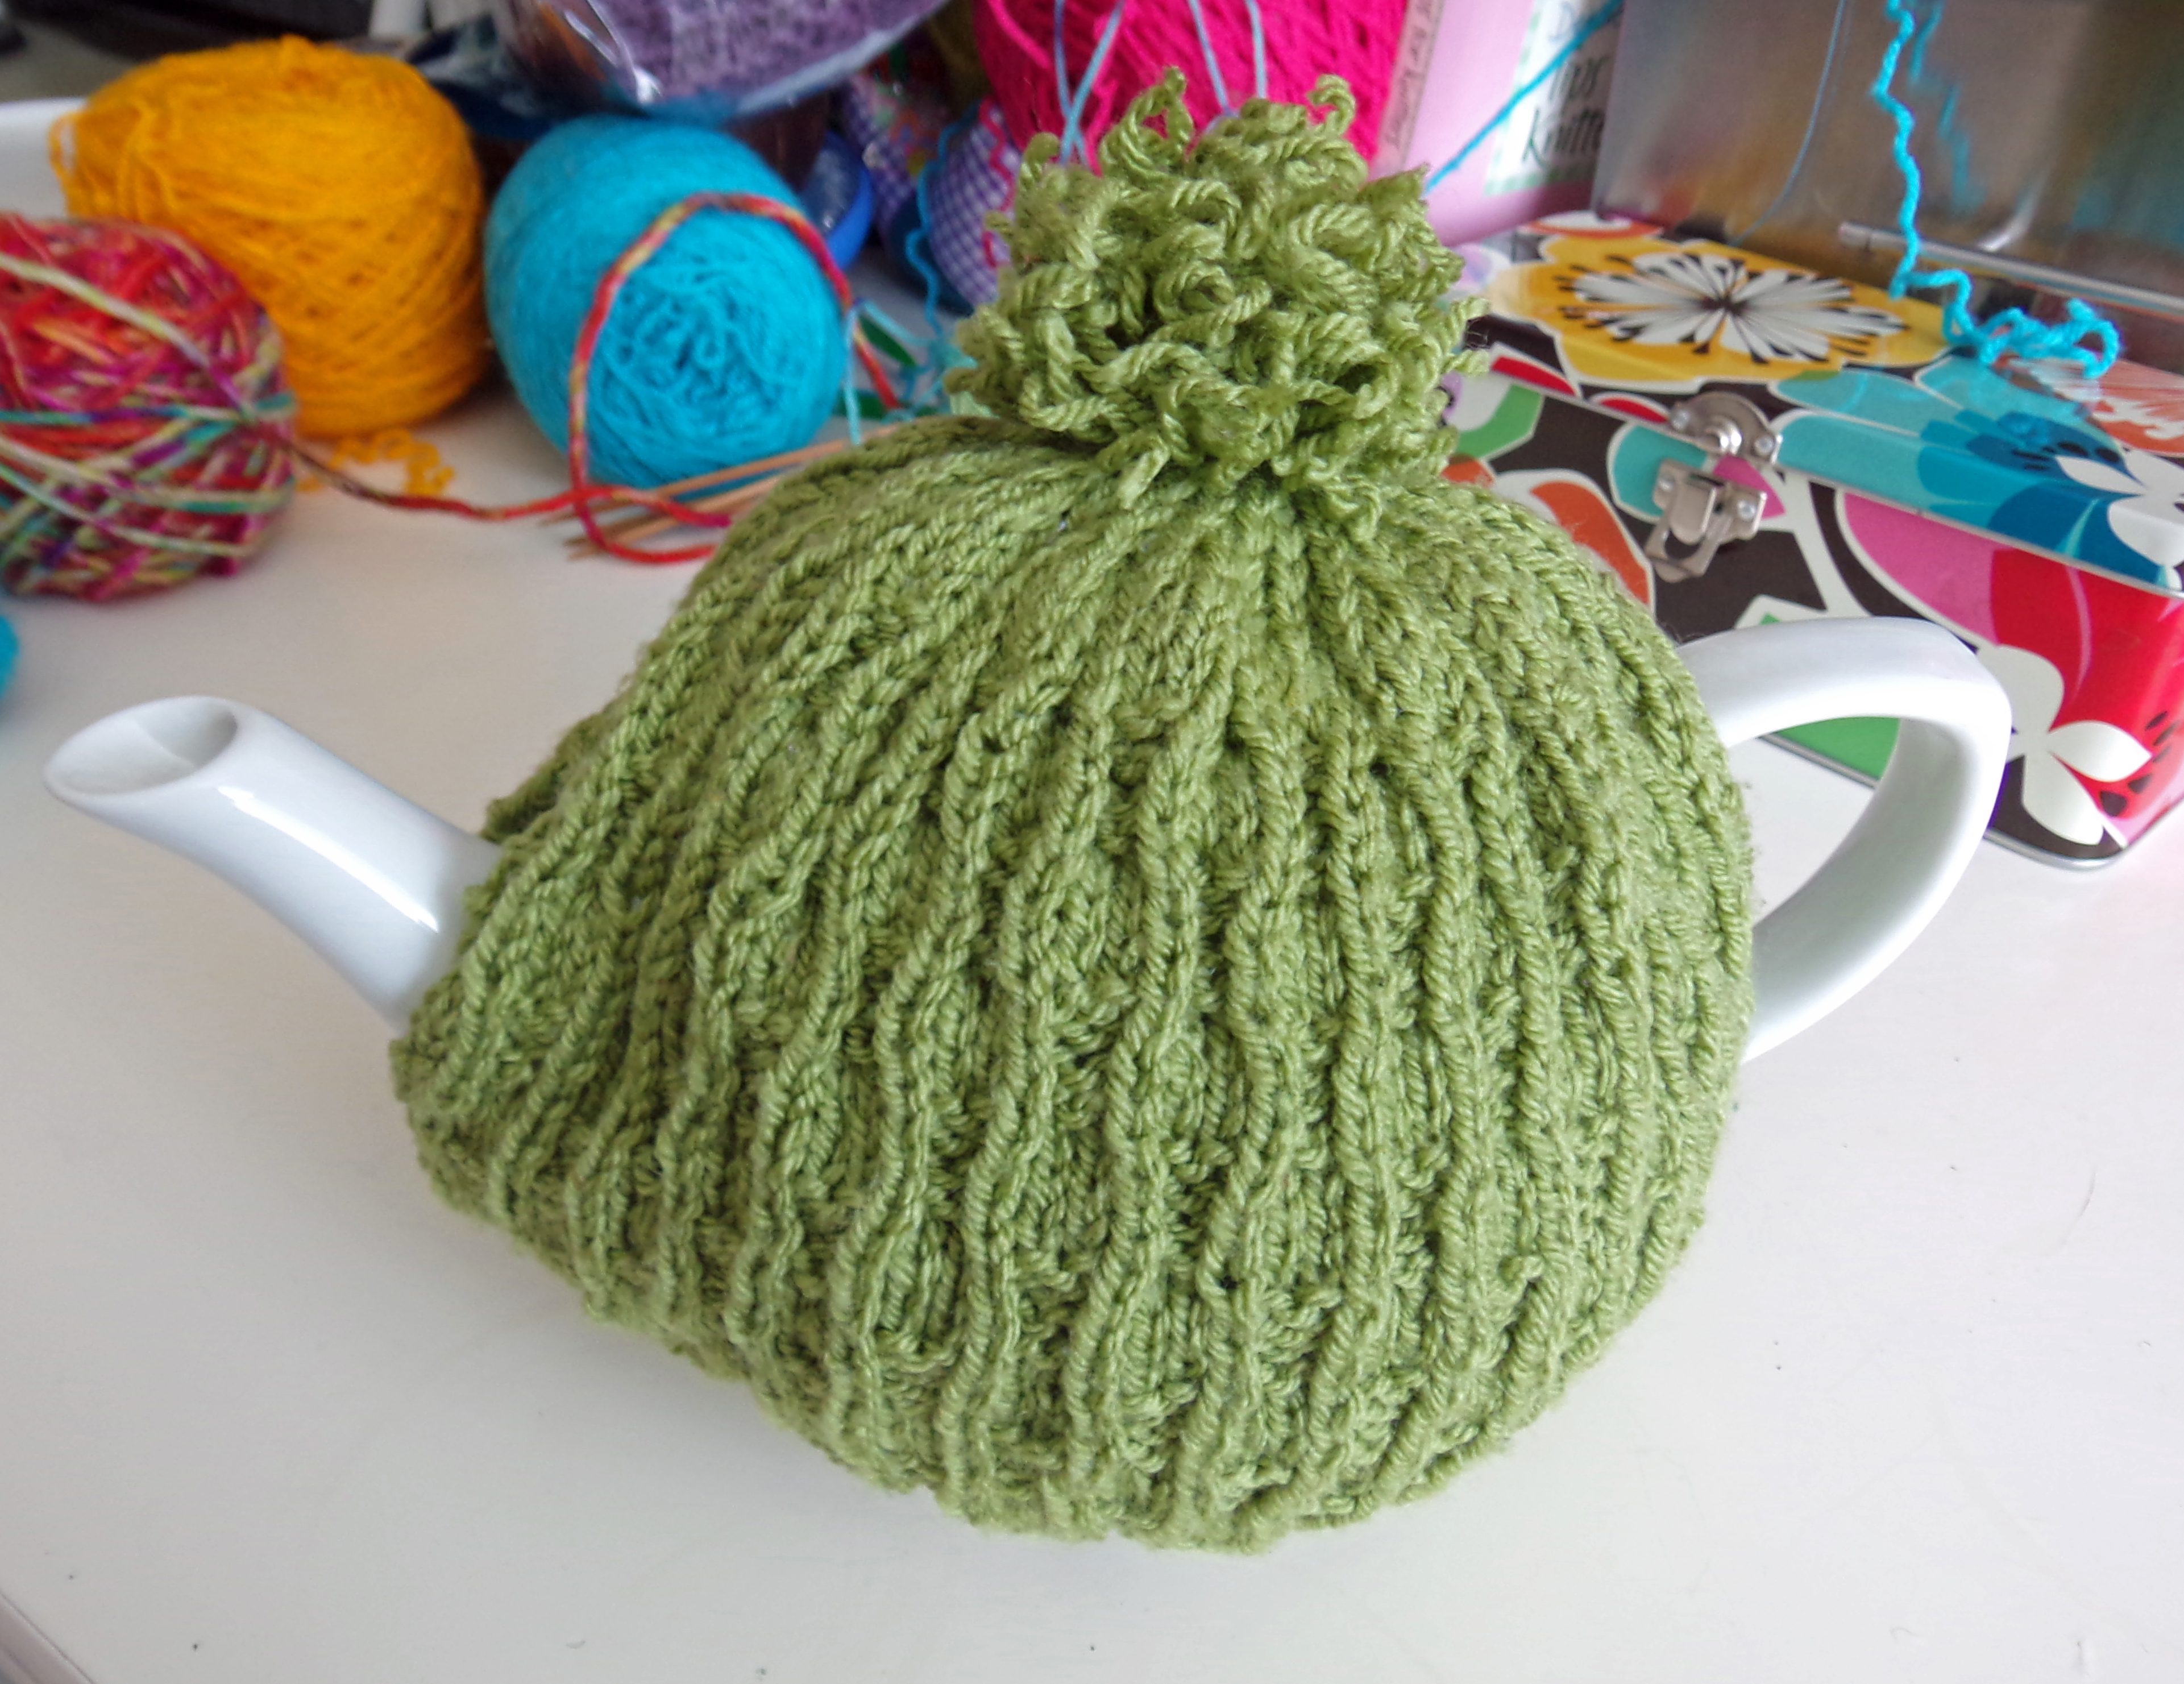 Knitted Tea Cosy Pattern Easy Three Free Tea Cosy Patterns Reviewed Or Why Tea Pots Are Better